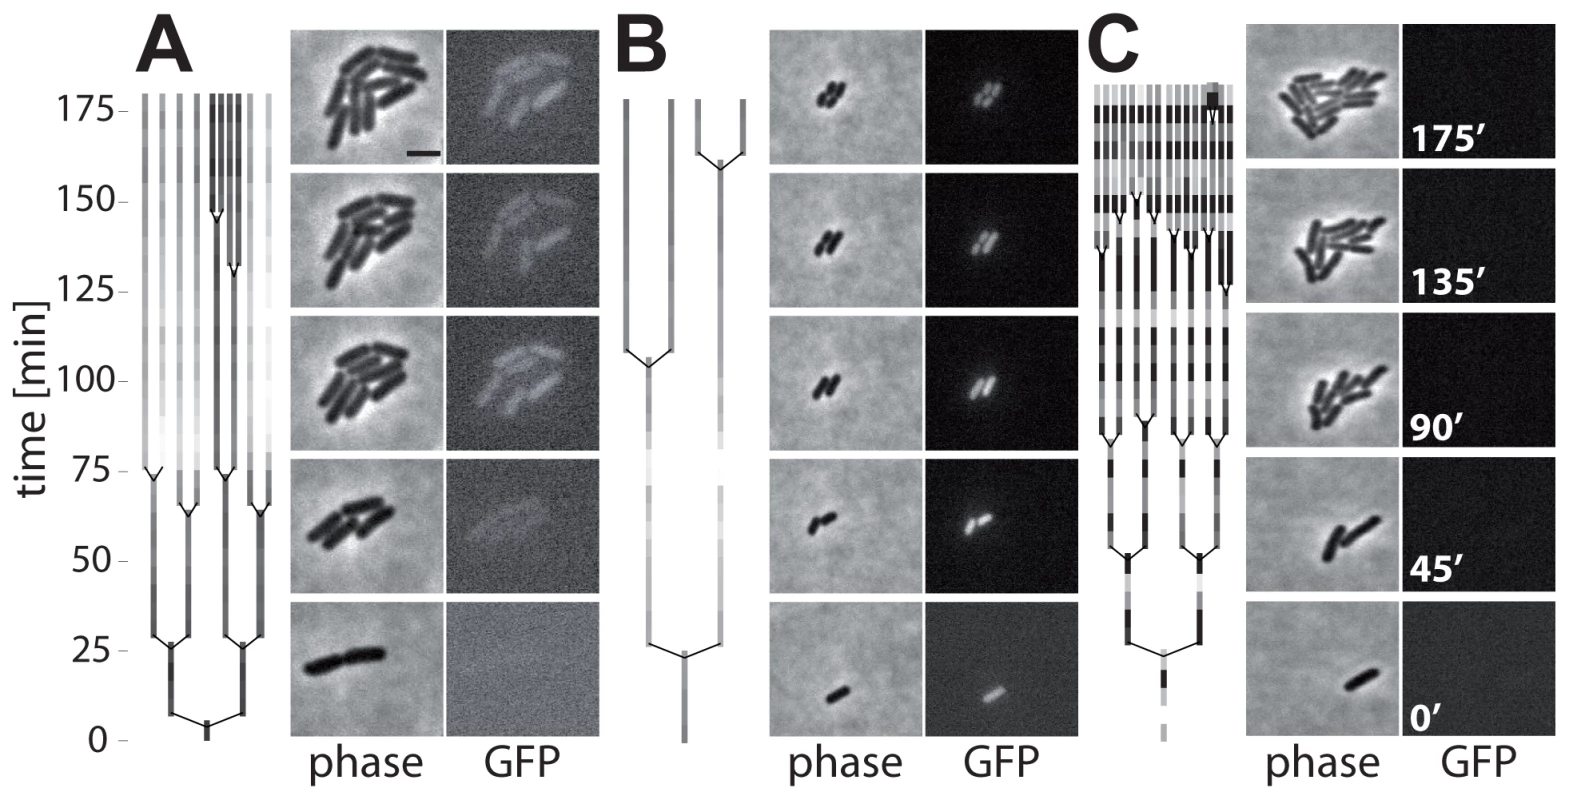 Time-lapse microscopy shows onset of <i>ttss-1</i> expression and concomitant growth retardation.